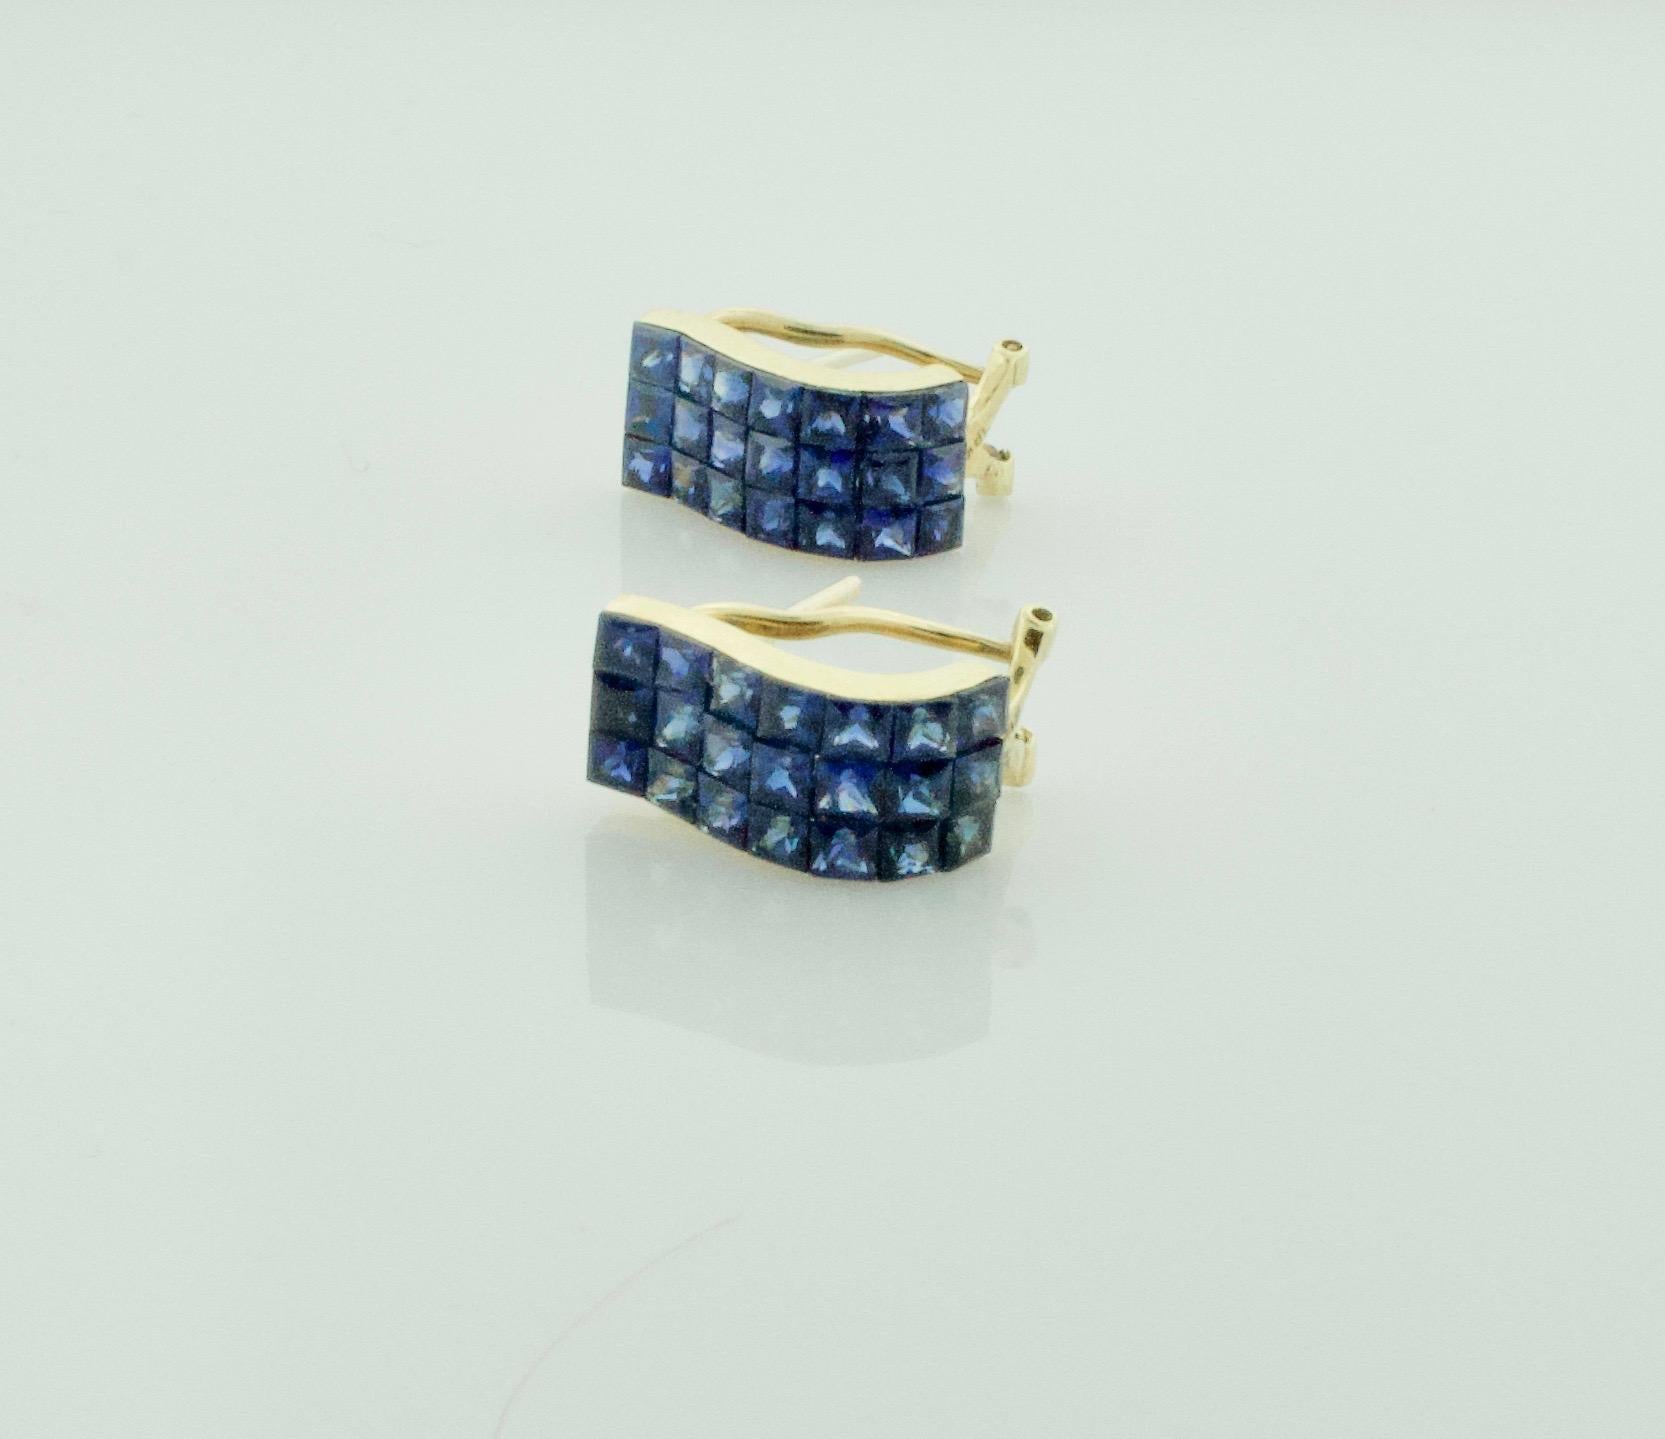 Invisibly Set Sapphire Earrings in 18k Yellow Gold
These earrings are a stunning display of sophistication and elegance, crafted with the finest 18k yellow gold. The yellow gold perfectly complements the 42 square cut sapphires, which weigh